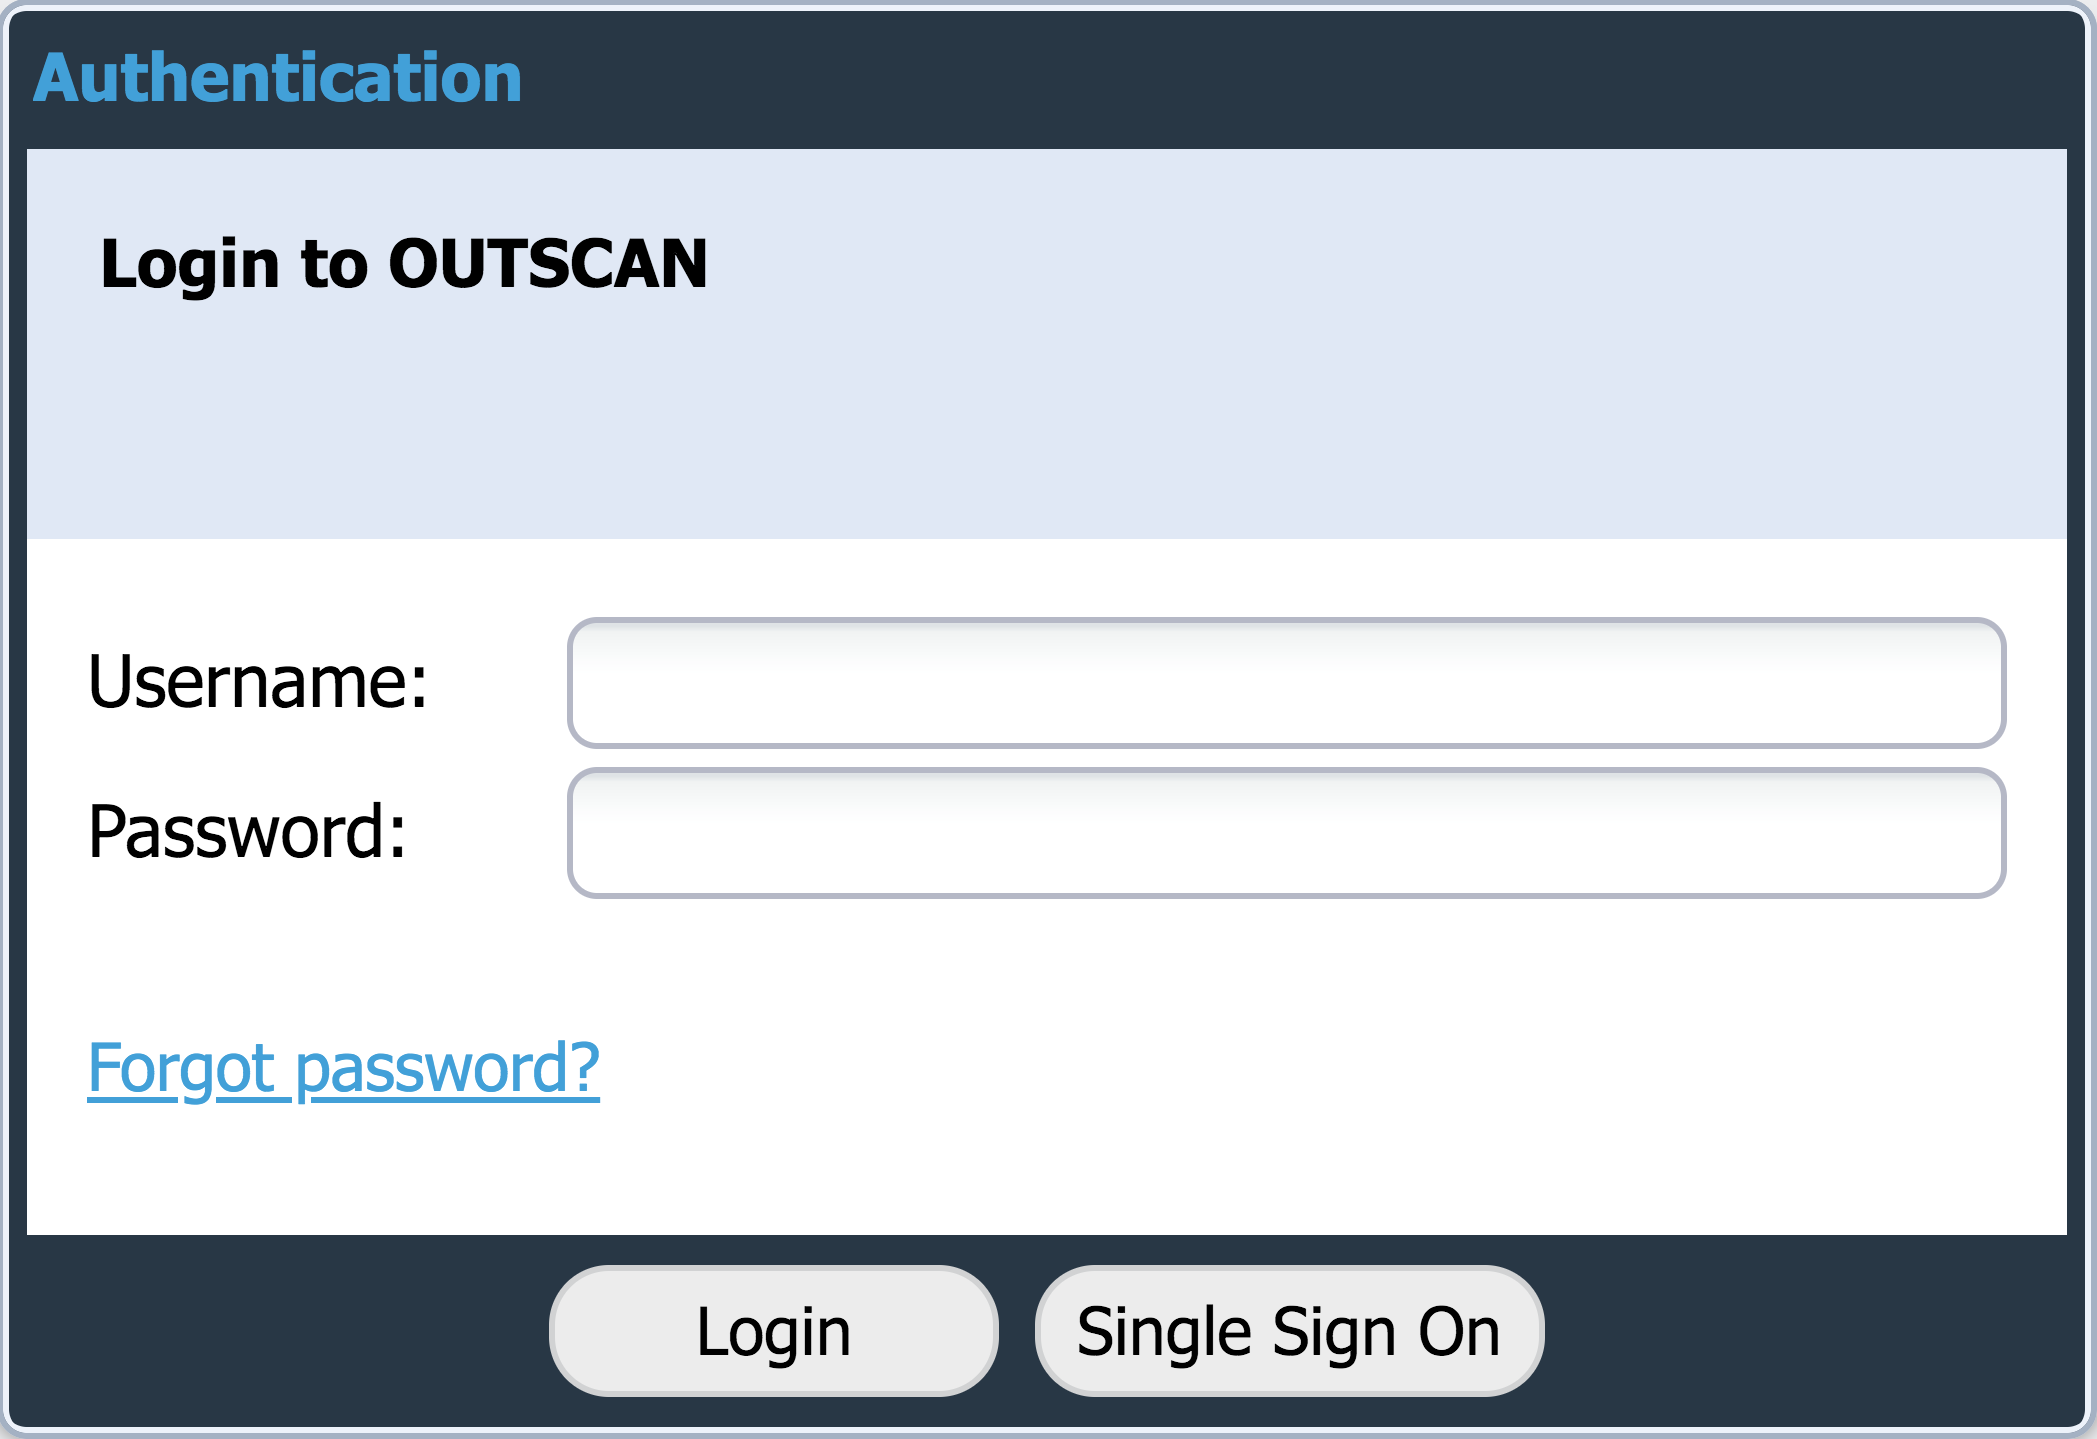 Login to OUTSCAN